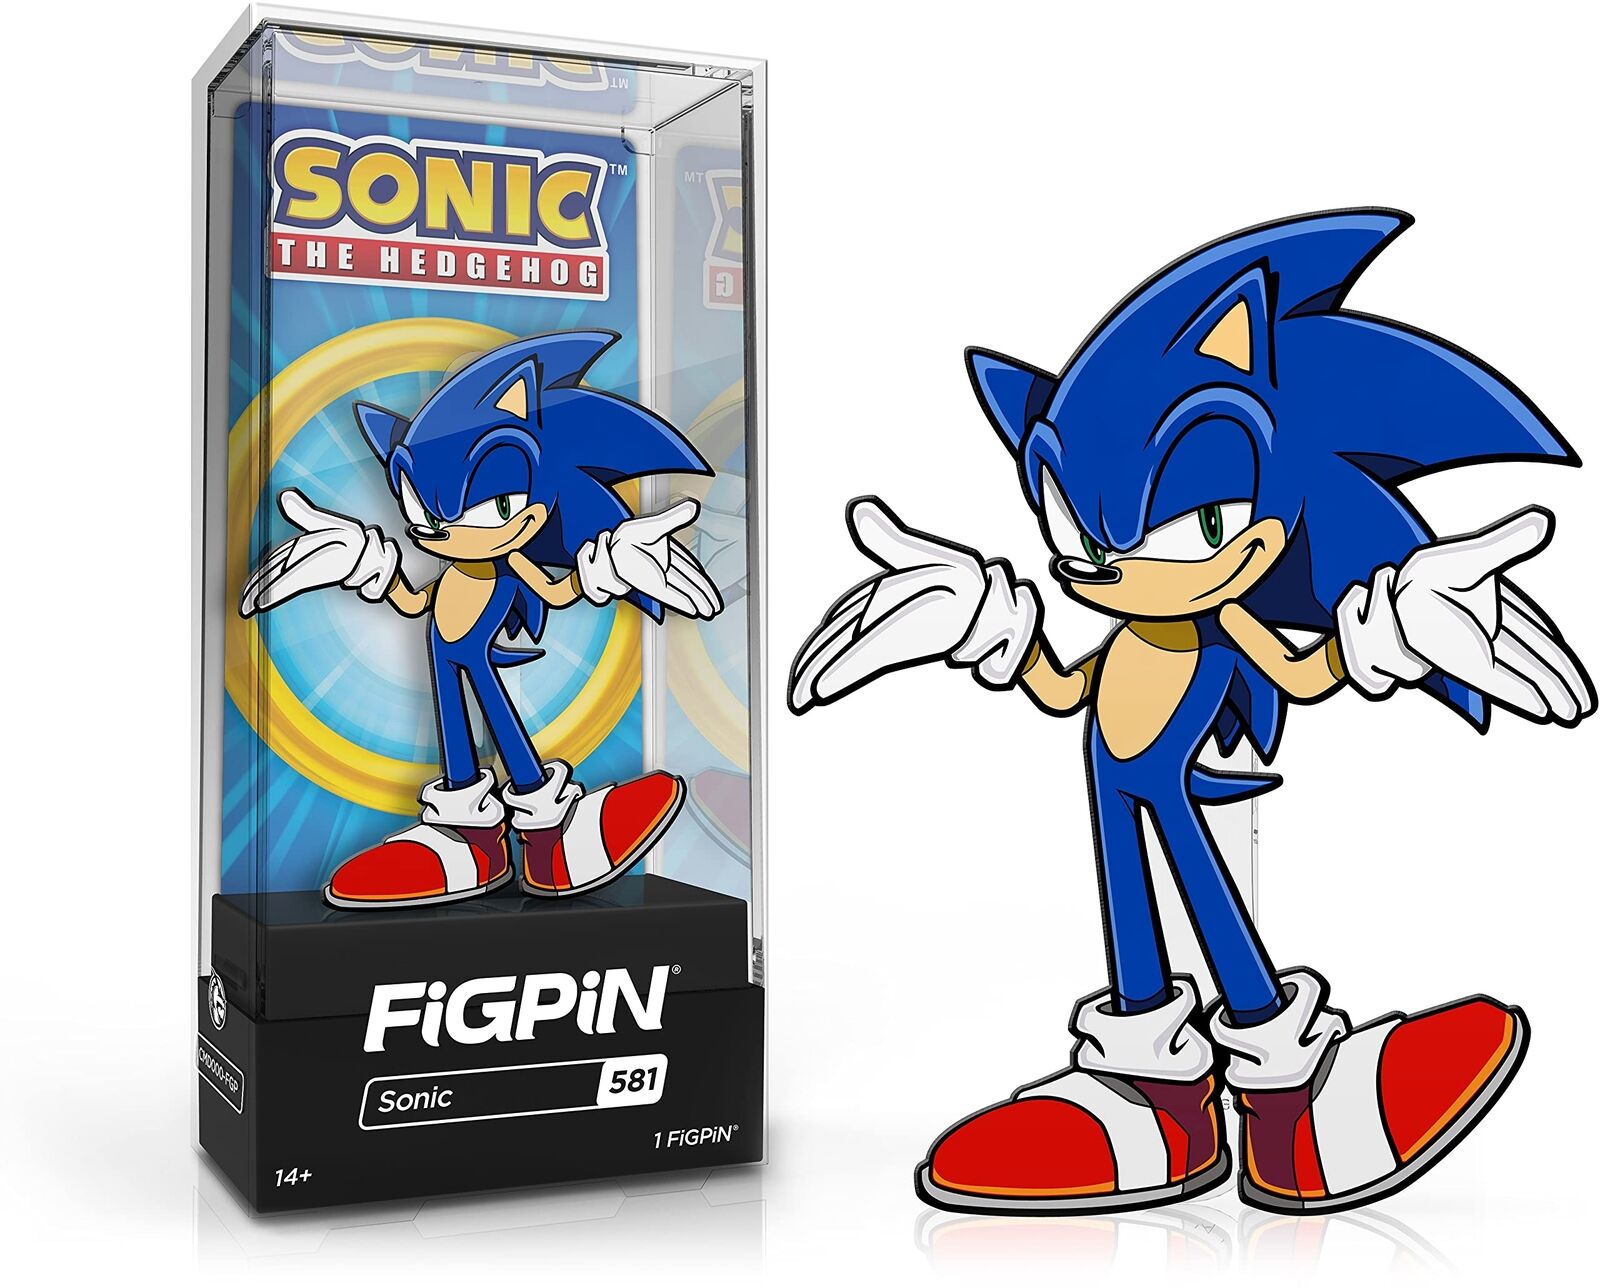 FiGPiN Sonic The Hedgehog #581